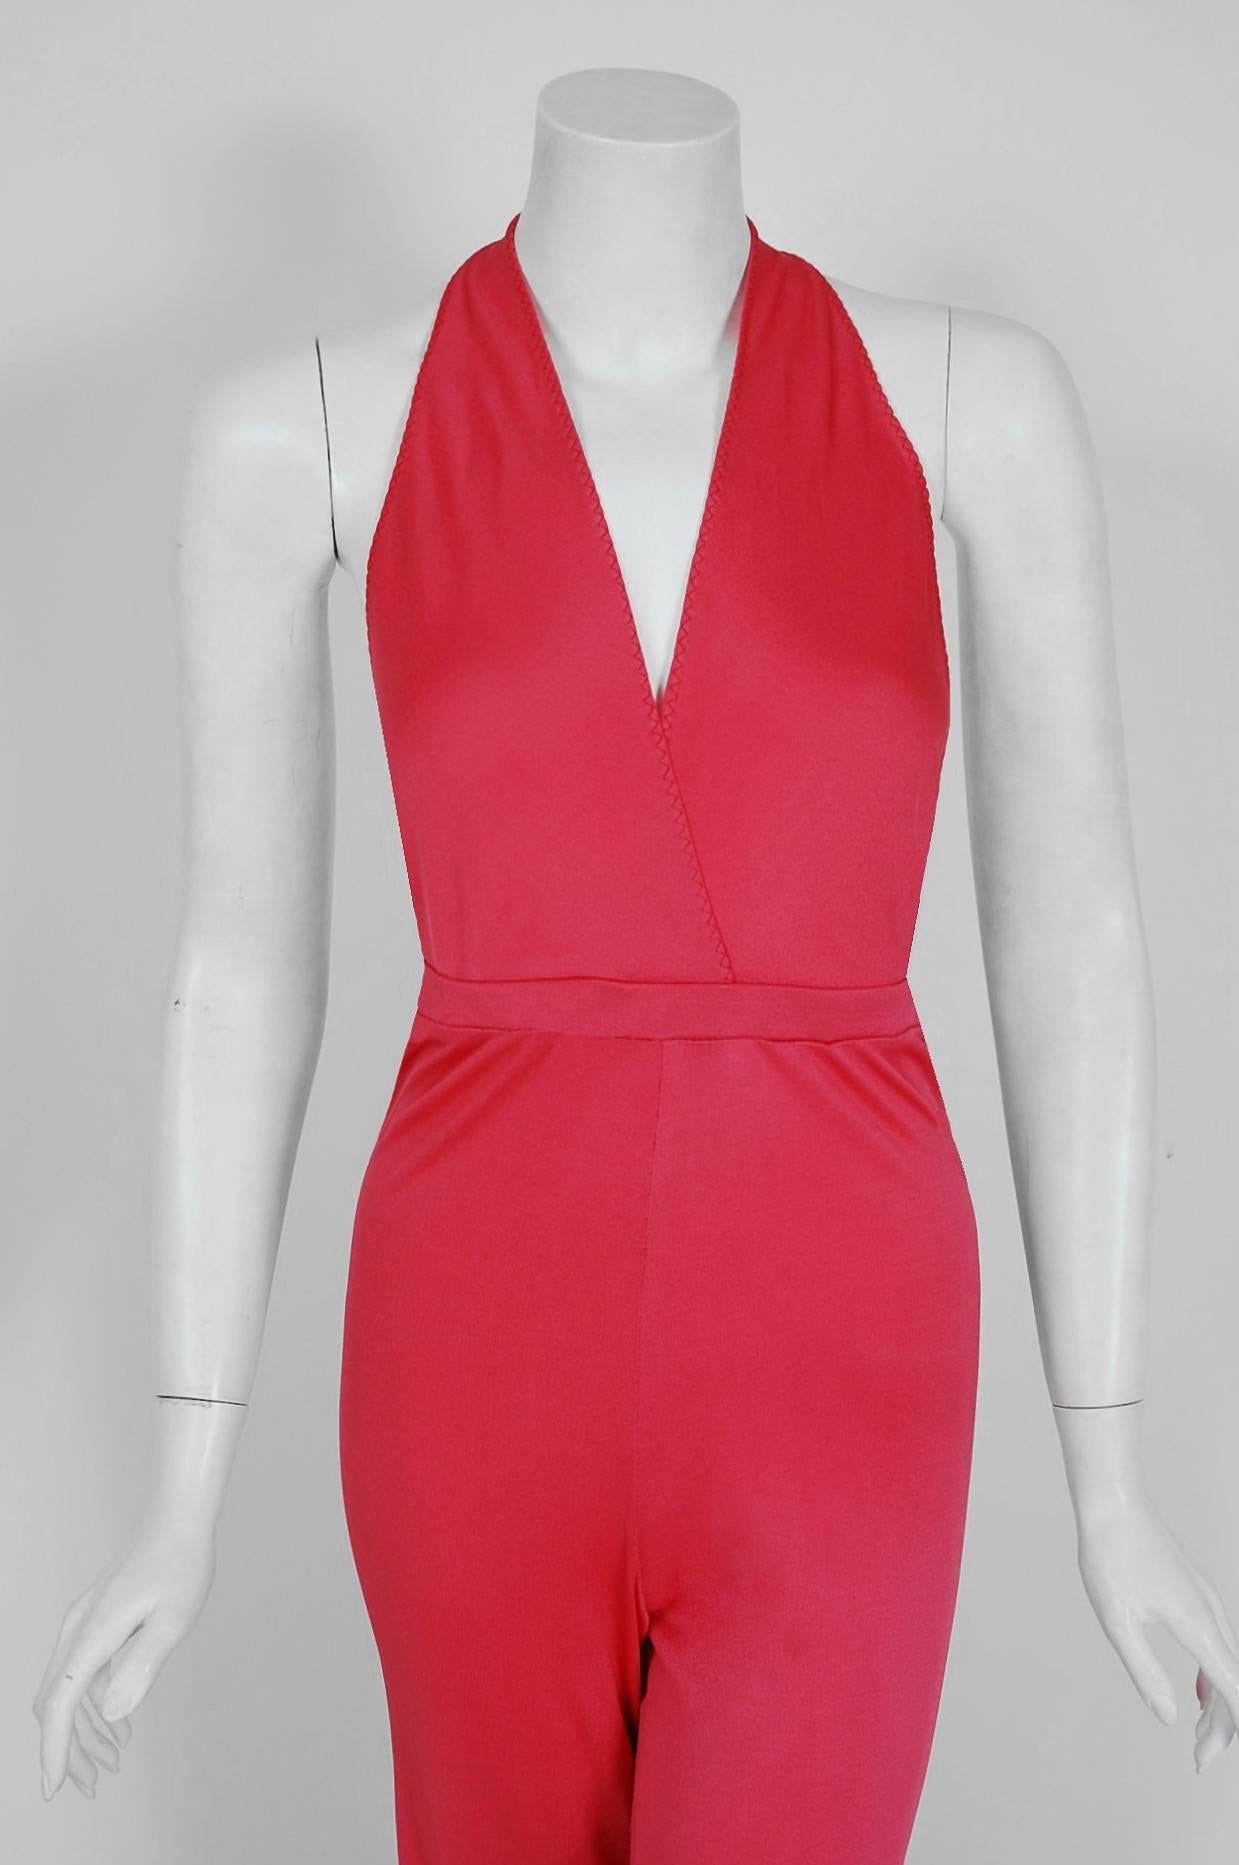 Ultra seductive 1970's bubblegum-pink jumpsuit by the famous Stephen Burrows. Melding his training in classic technique with his own adventurous vision, he is best known for his 